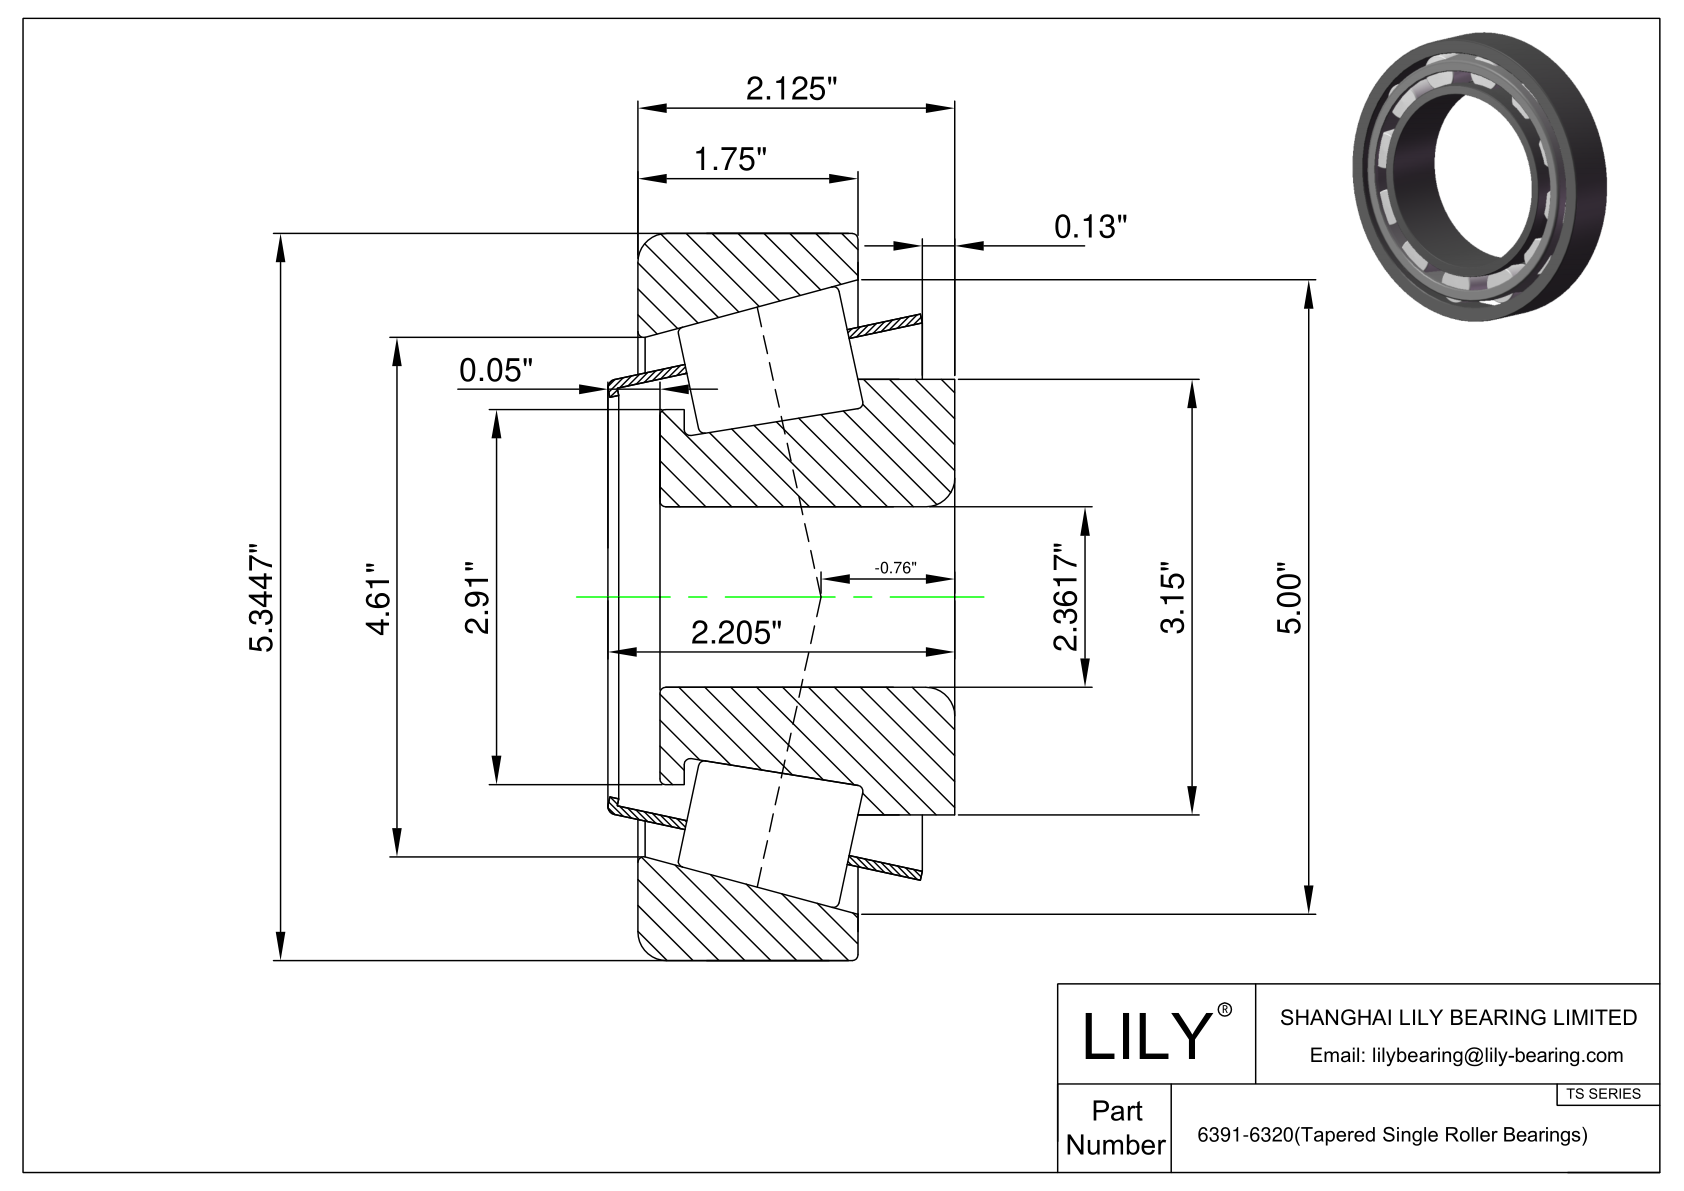 6391-6320 TS (Tapered Single Roller Bearings) (Imperial) cad drawing